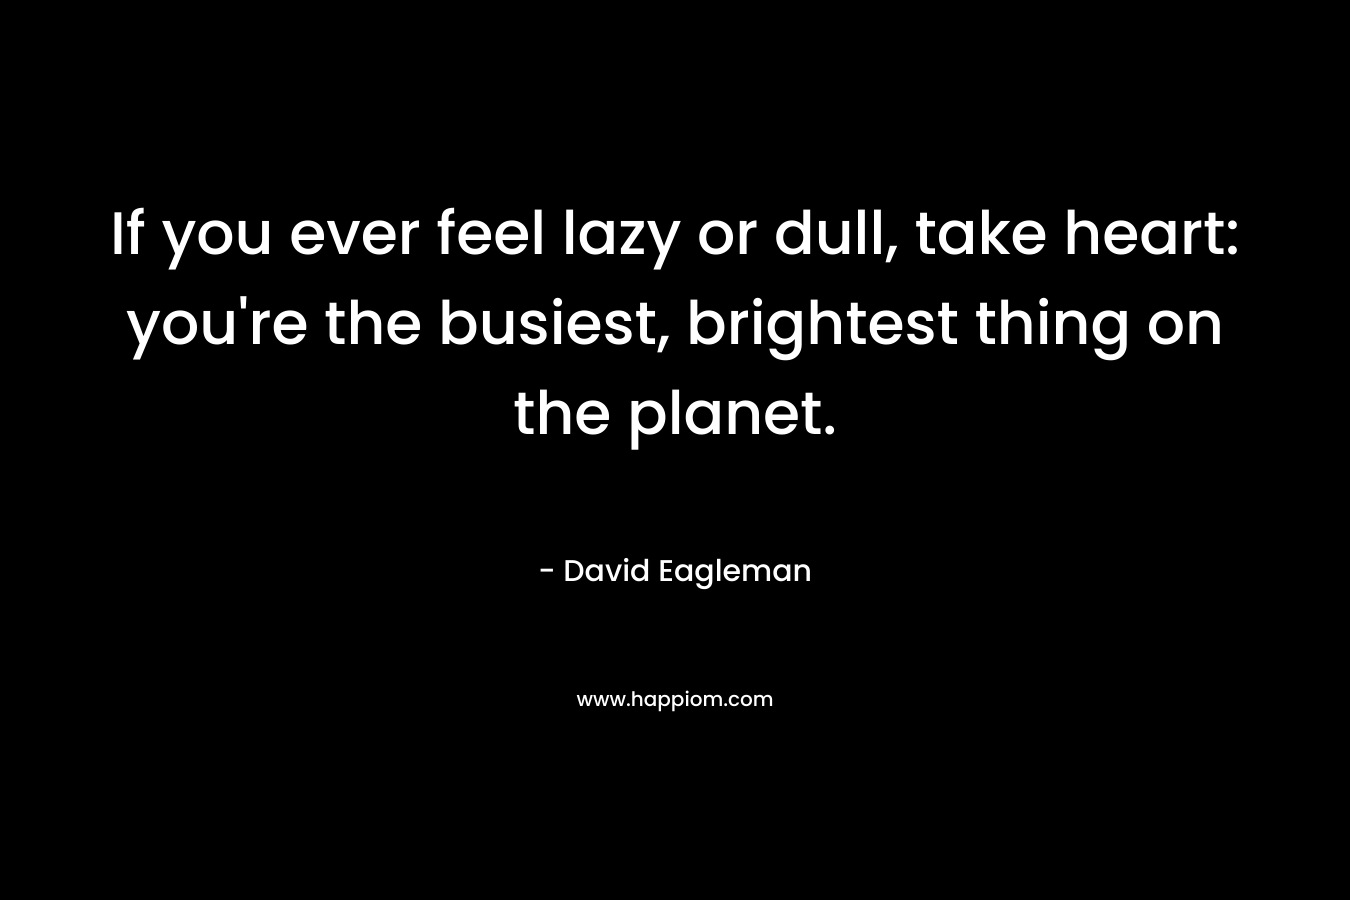 If you ever feel lazy or dull, take heart: you’re the busiest, brightest thing on the planet. – David Eagleman